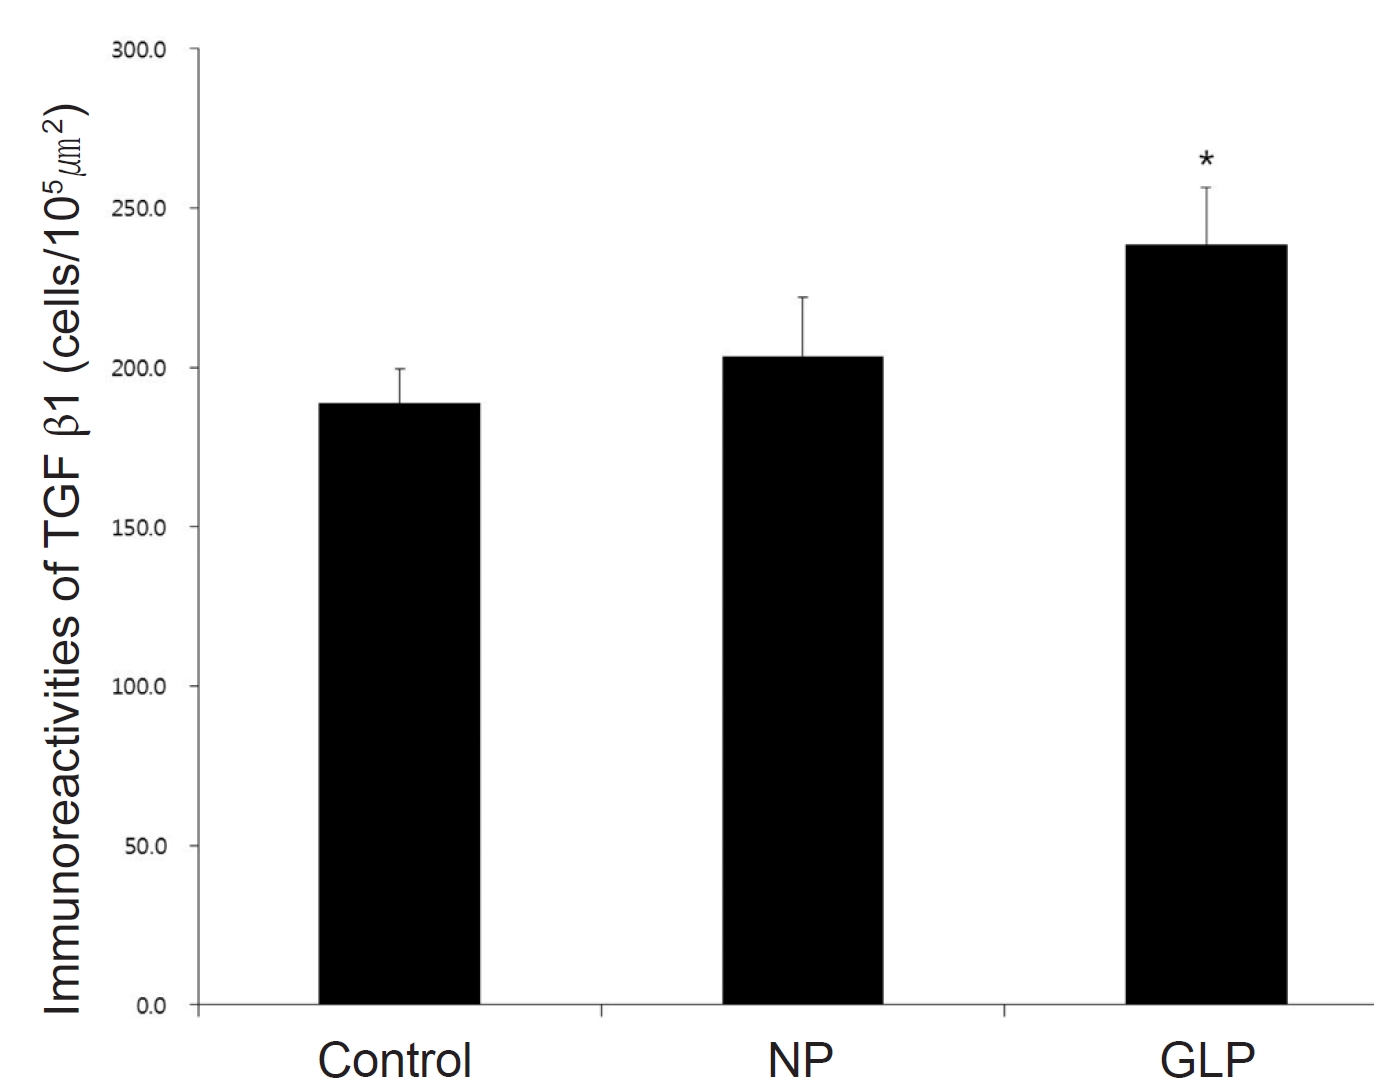 Immunoactivities of TGF-β1 proteins in EtOH/HCl-induced
acute gastric ulcers in rats. Mean ± S.E. *P < 0.05 vs. Control; NP, injection
of saline; GLP, injection of Ganoderma lucidum pharmacopuncture.